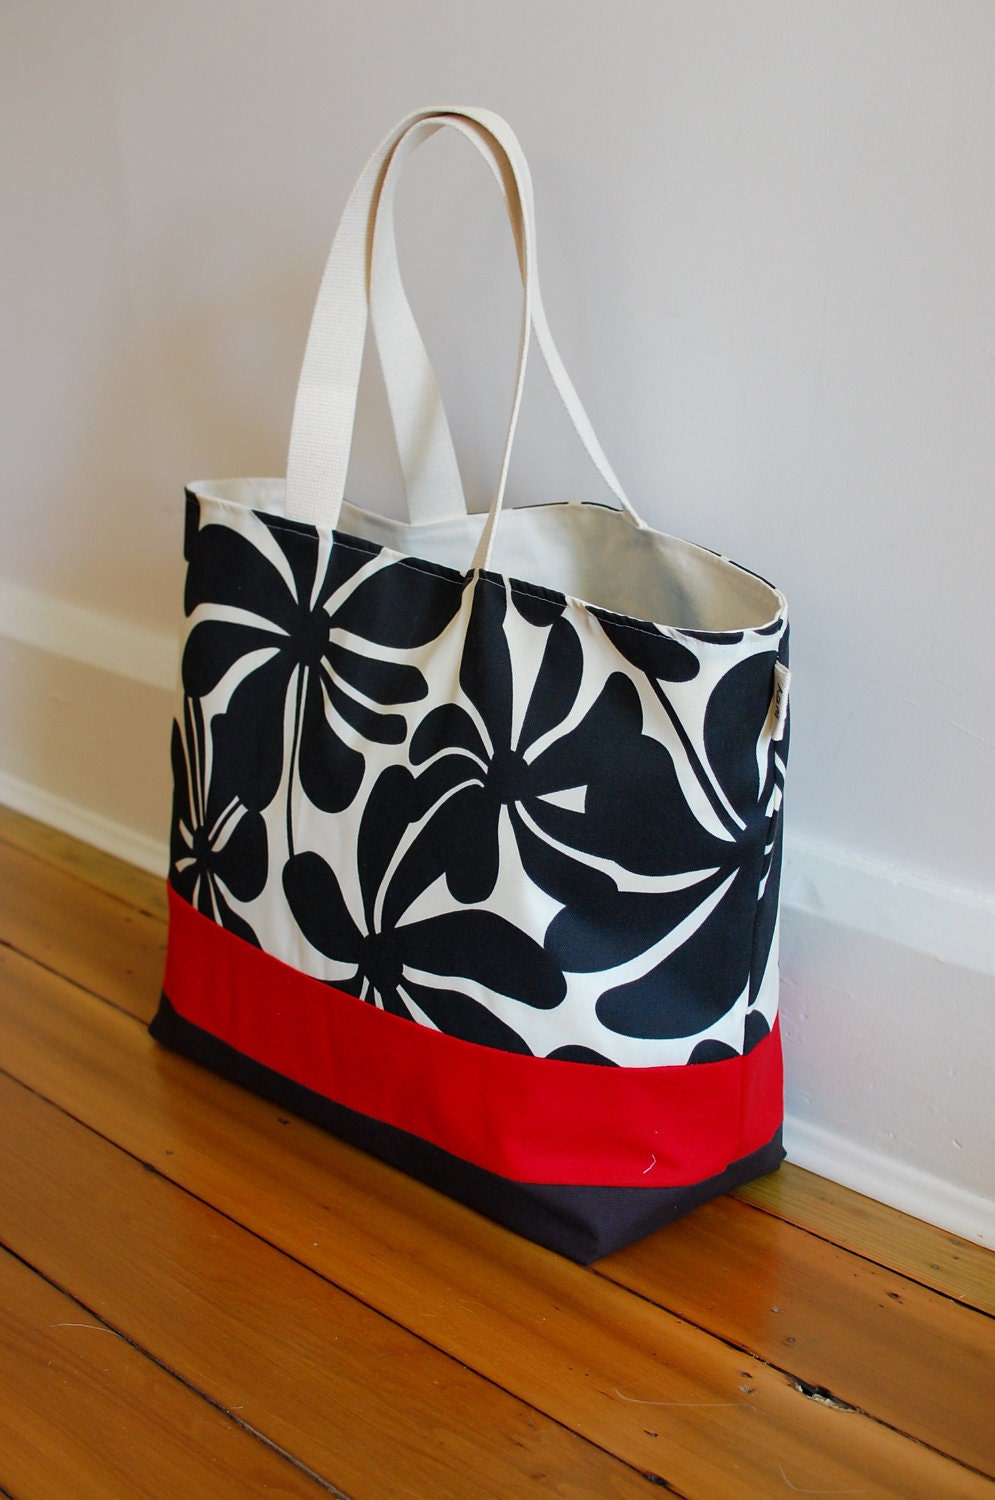 EXTRA Large Beach Bag // Tote in Black Floral with Red